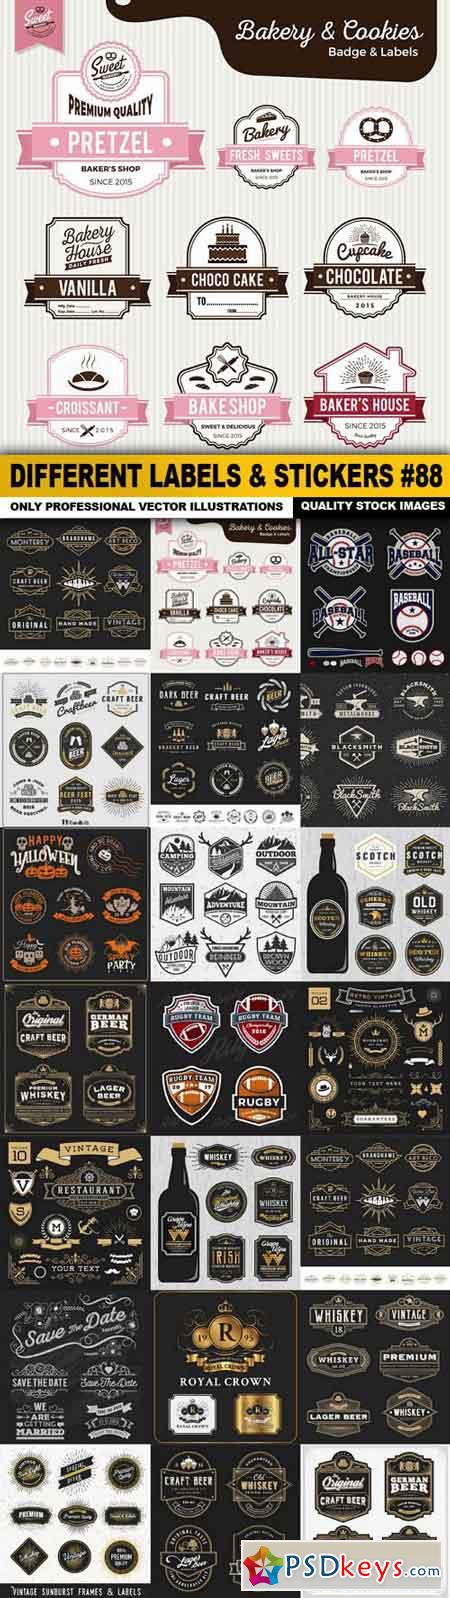 Different Labels & Stickers #88 - 20 Vector